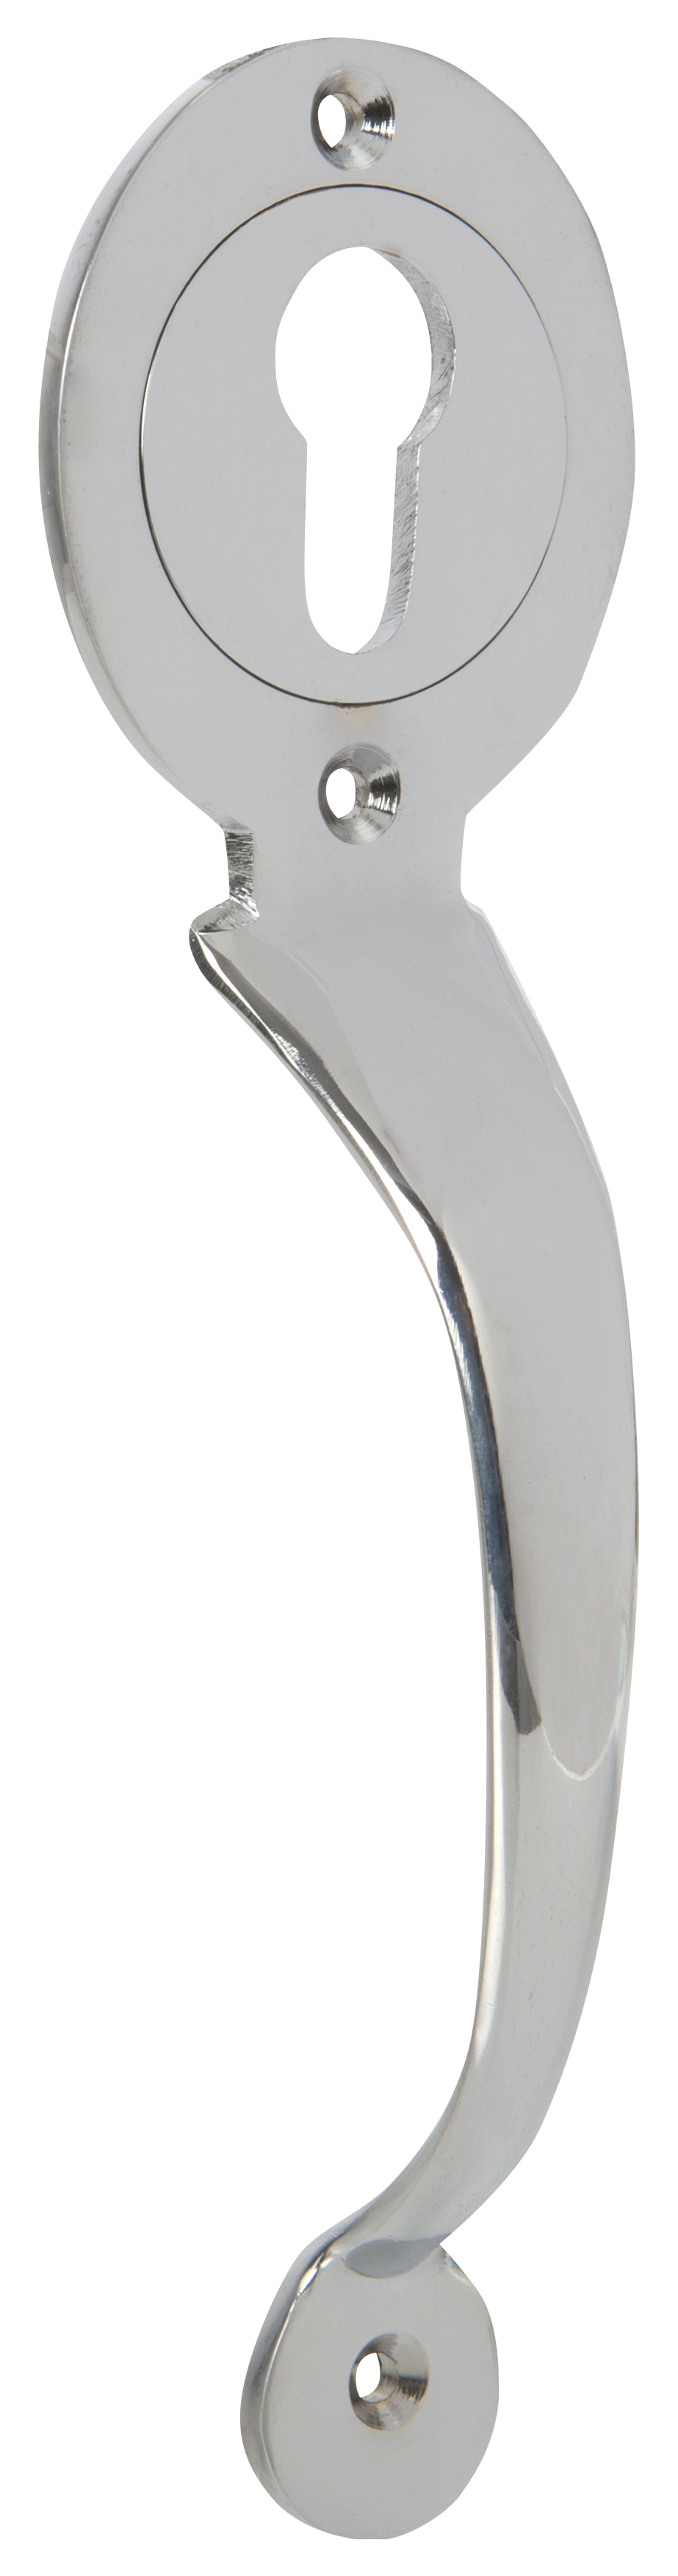 Image of GateMate B147201C Chrome Pull Handle for Euro Profile Long Throw Lock - 8in (200mm)